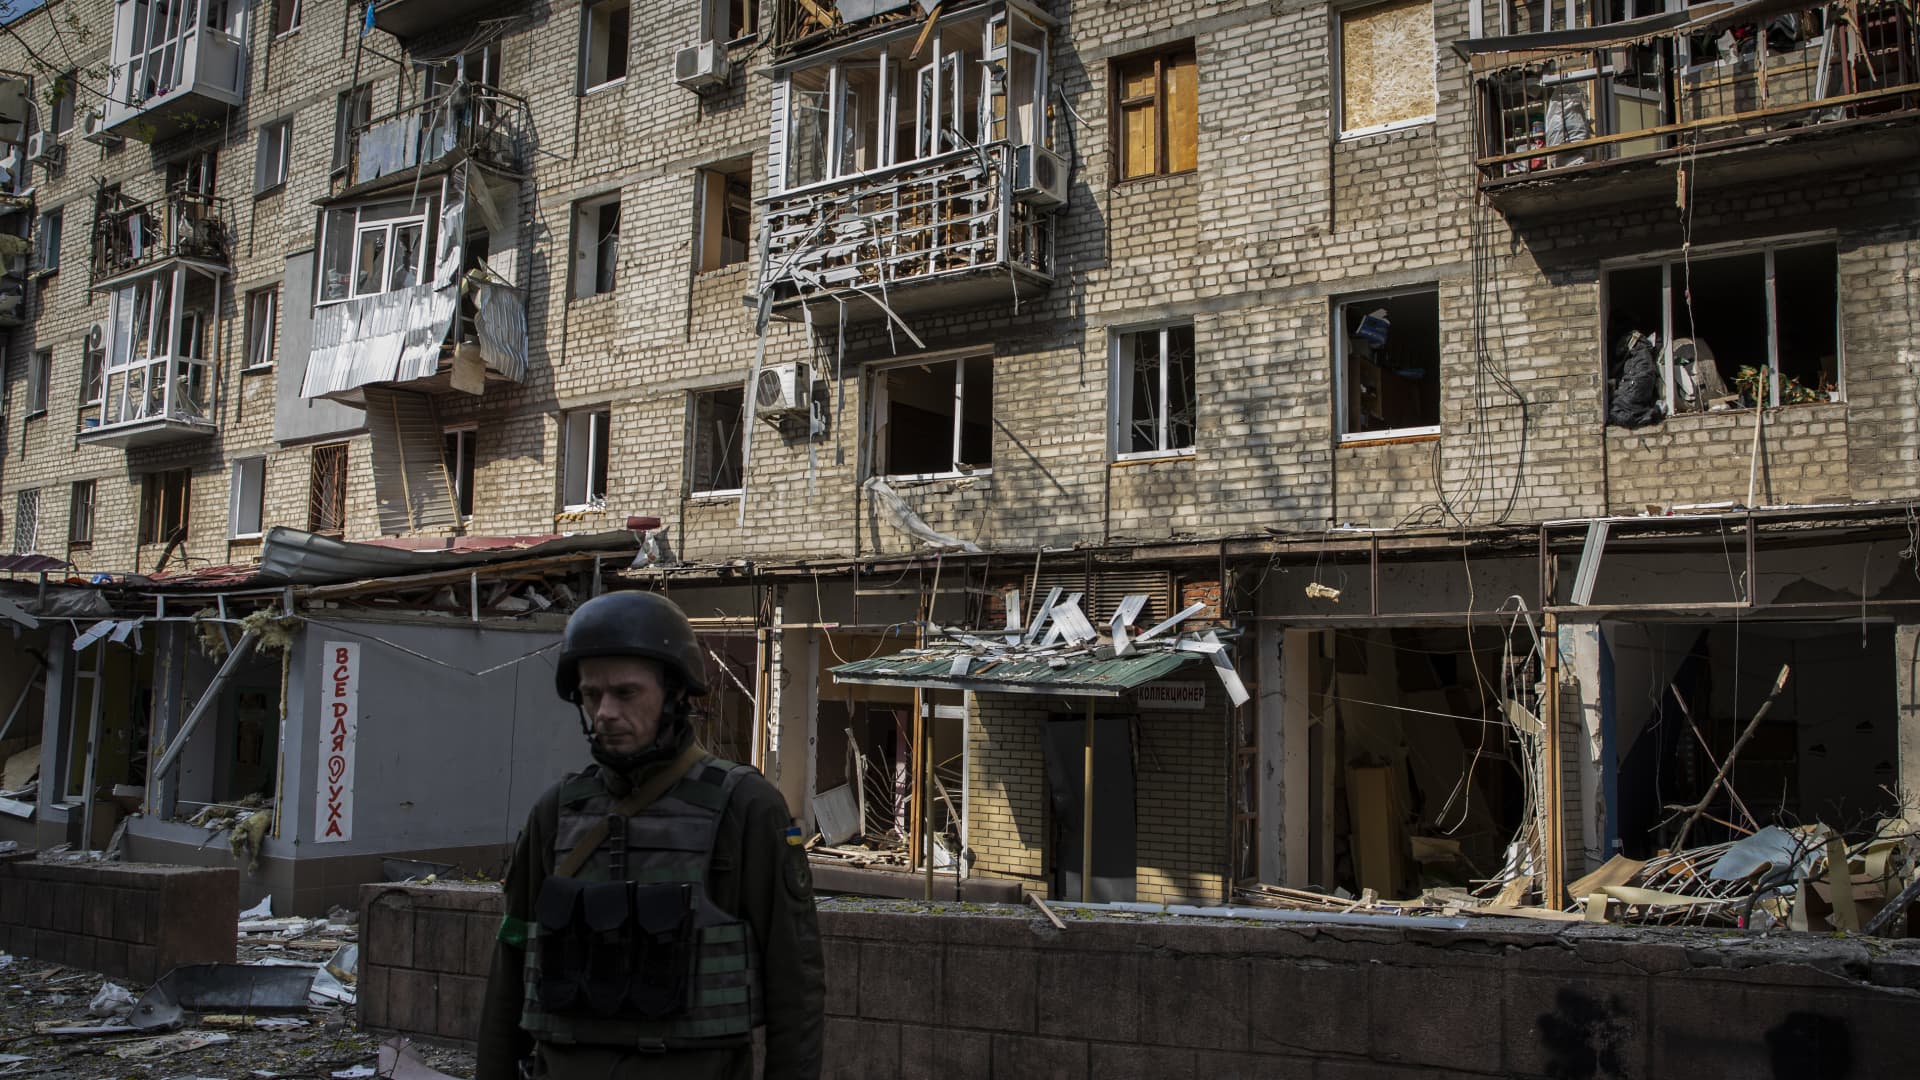 A Ukrainian soldier in front of a residential building destroyed by a Russian artillery strike in Kharkiv, Ukraine. Russia is likely to intensify ongoing deportations of Ukrainians, said the U.S. ambassador to the Organization for Security and Cooperation in Europe.